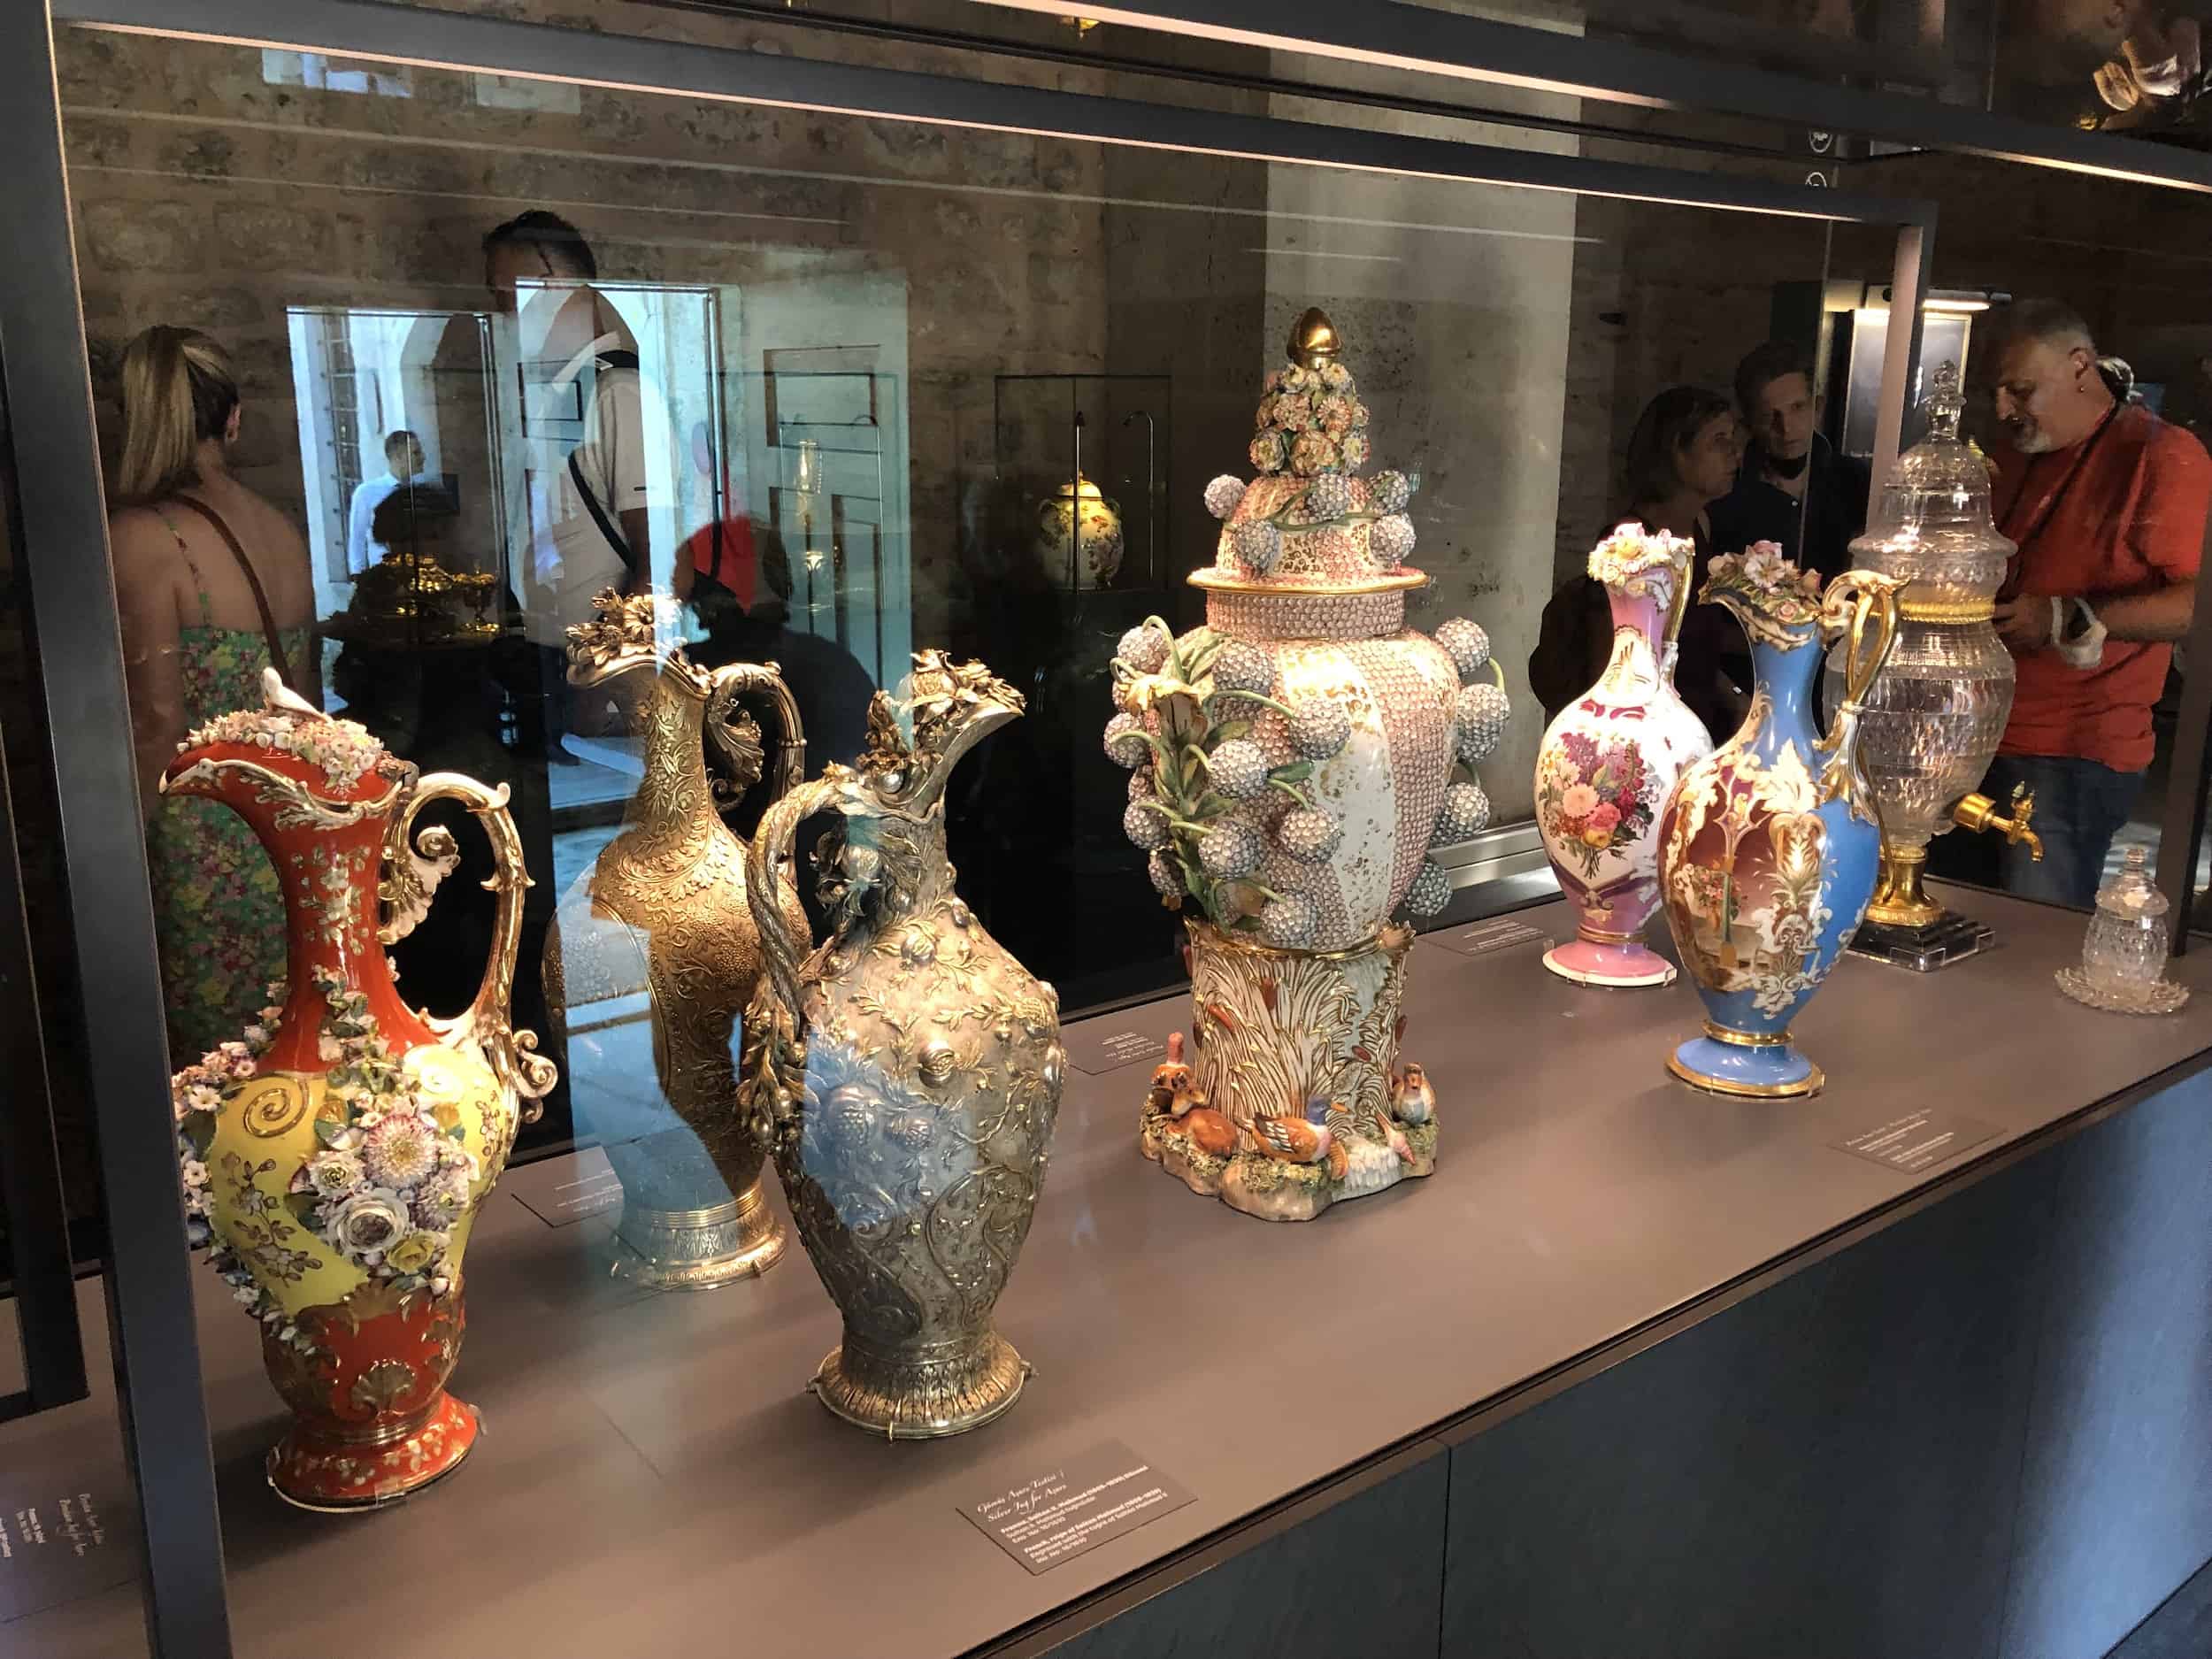 Porcelain, silver, and glass jugs in the Sherbet Room at the Palace Kitchens at Topkapi Palace in Istanbul, Turkey